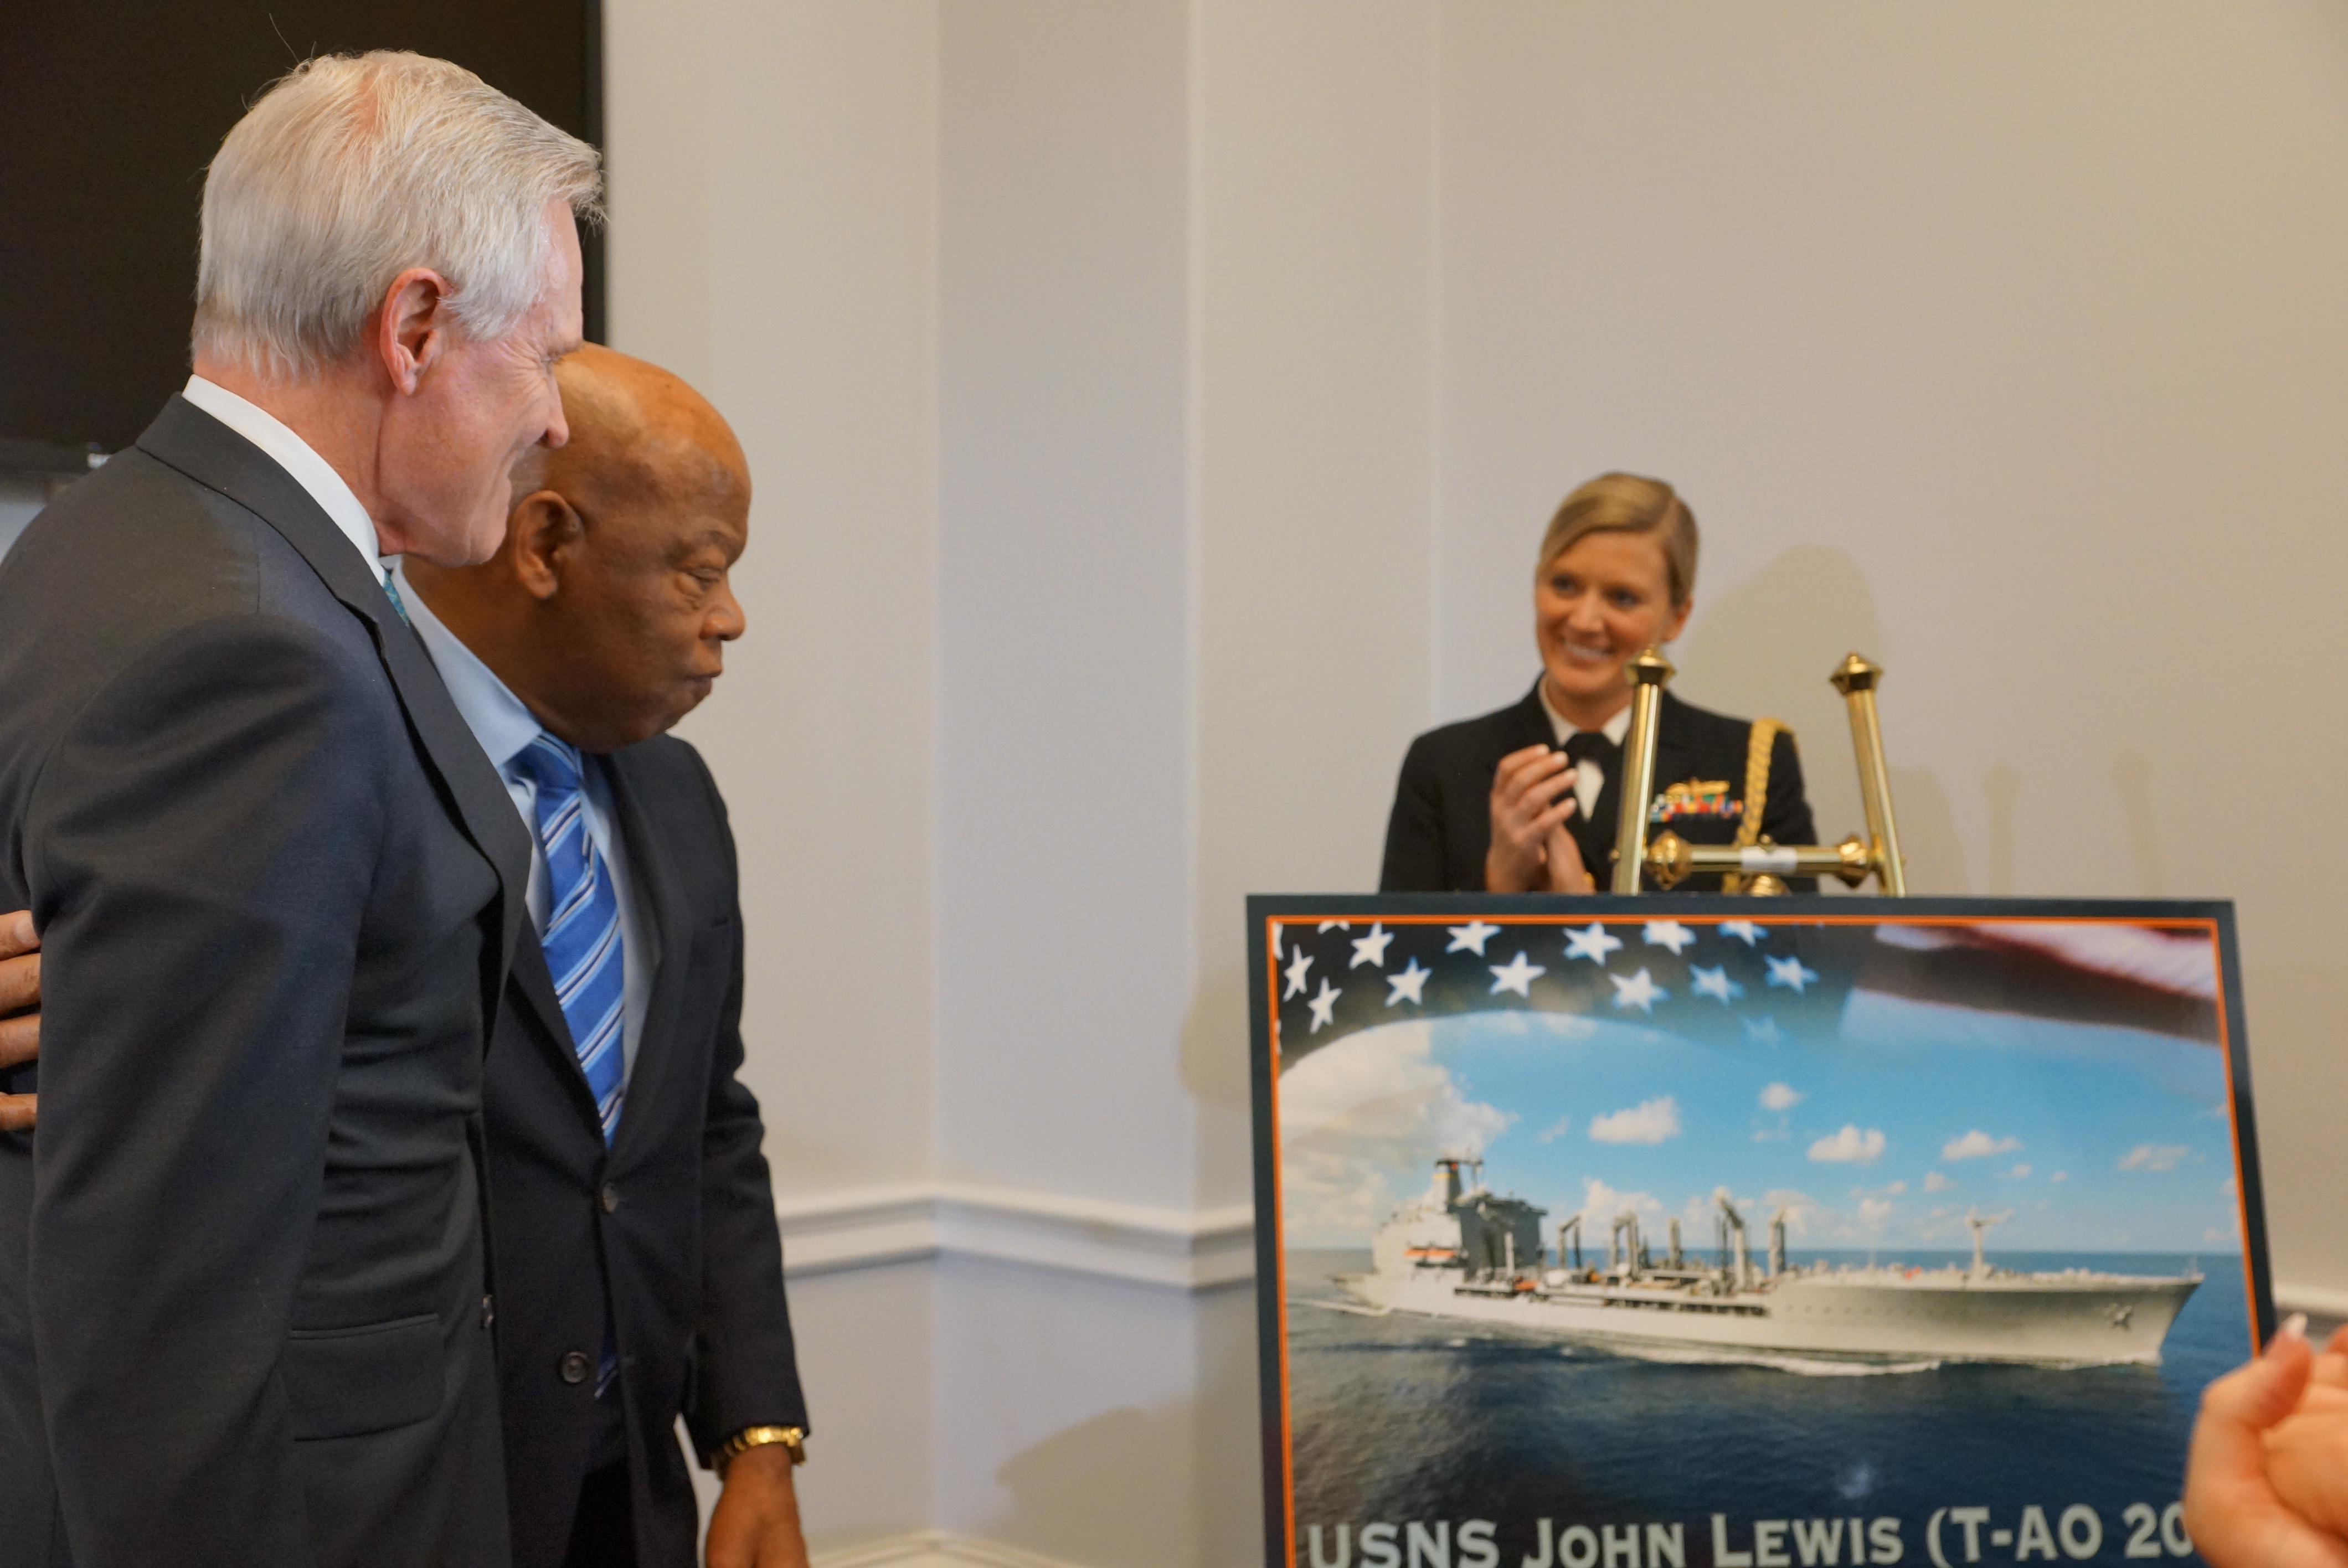 A quote by the late Congressman John Lewis resurfaces, and not a